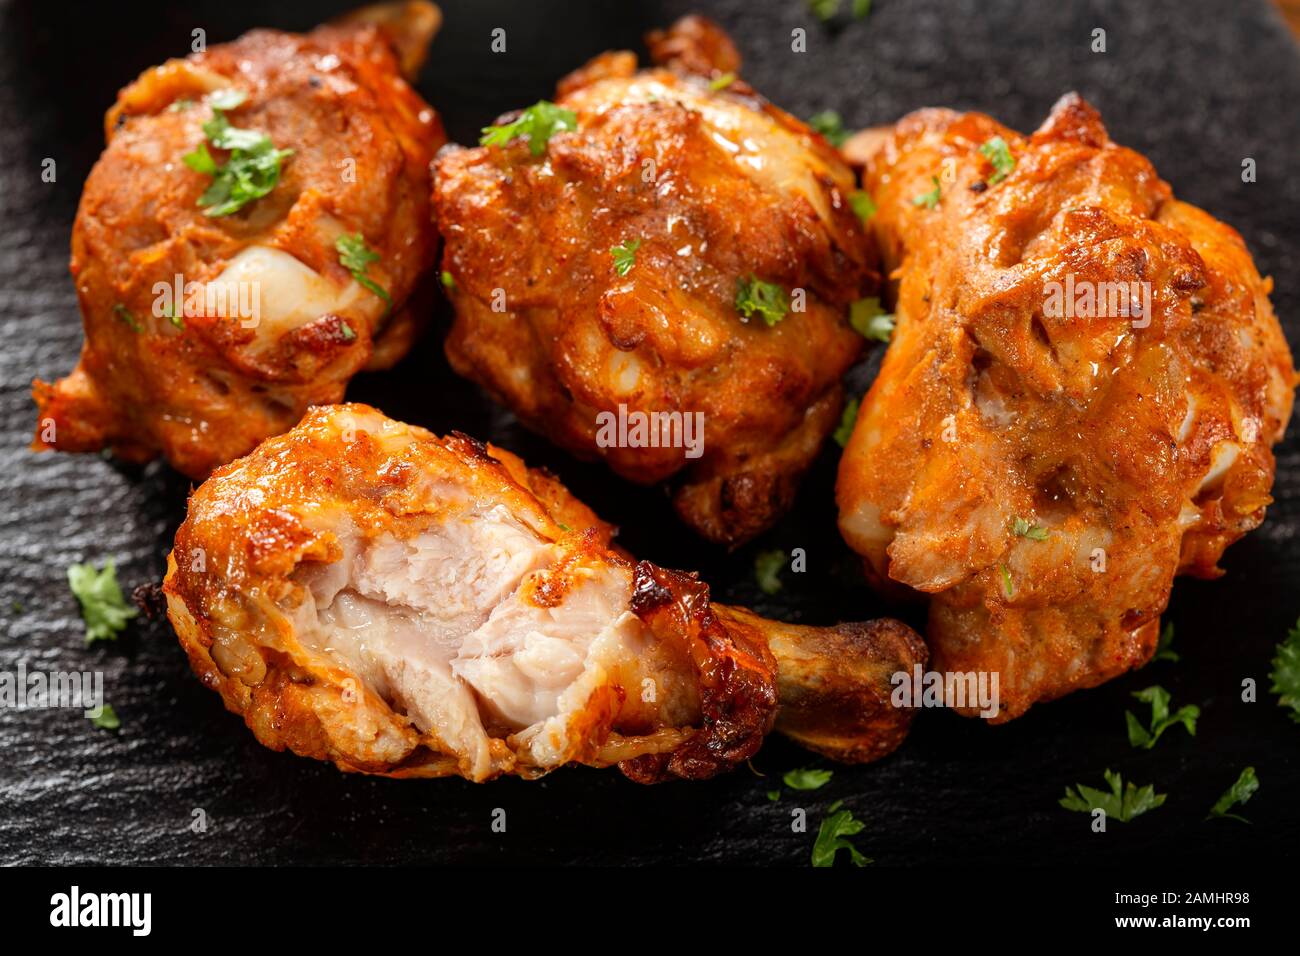 Roasted chicken drumsticks on dark slate - close up view Stock Photo